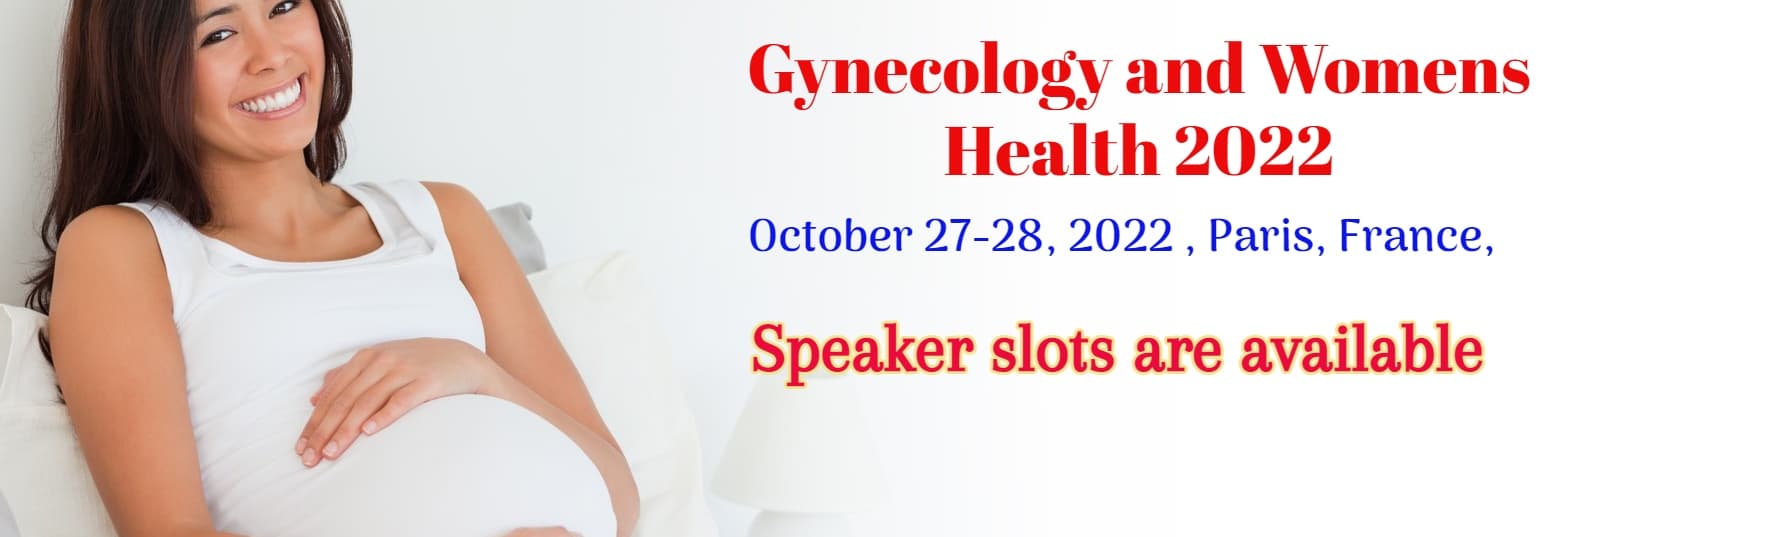 2nd World congress on Gynecology and Women’s health 2022